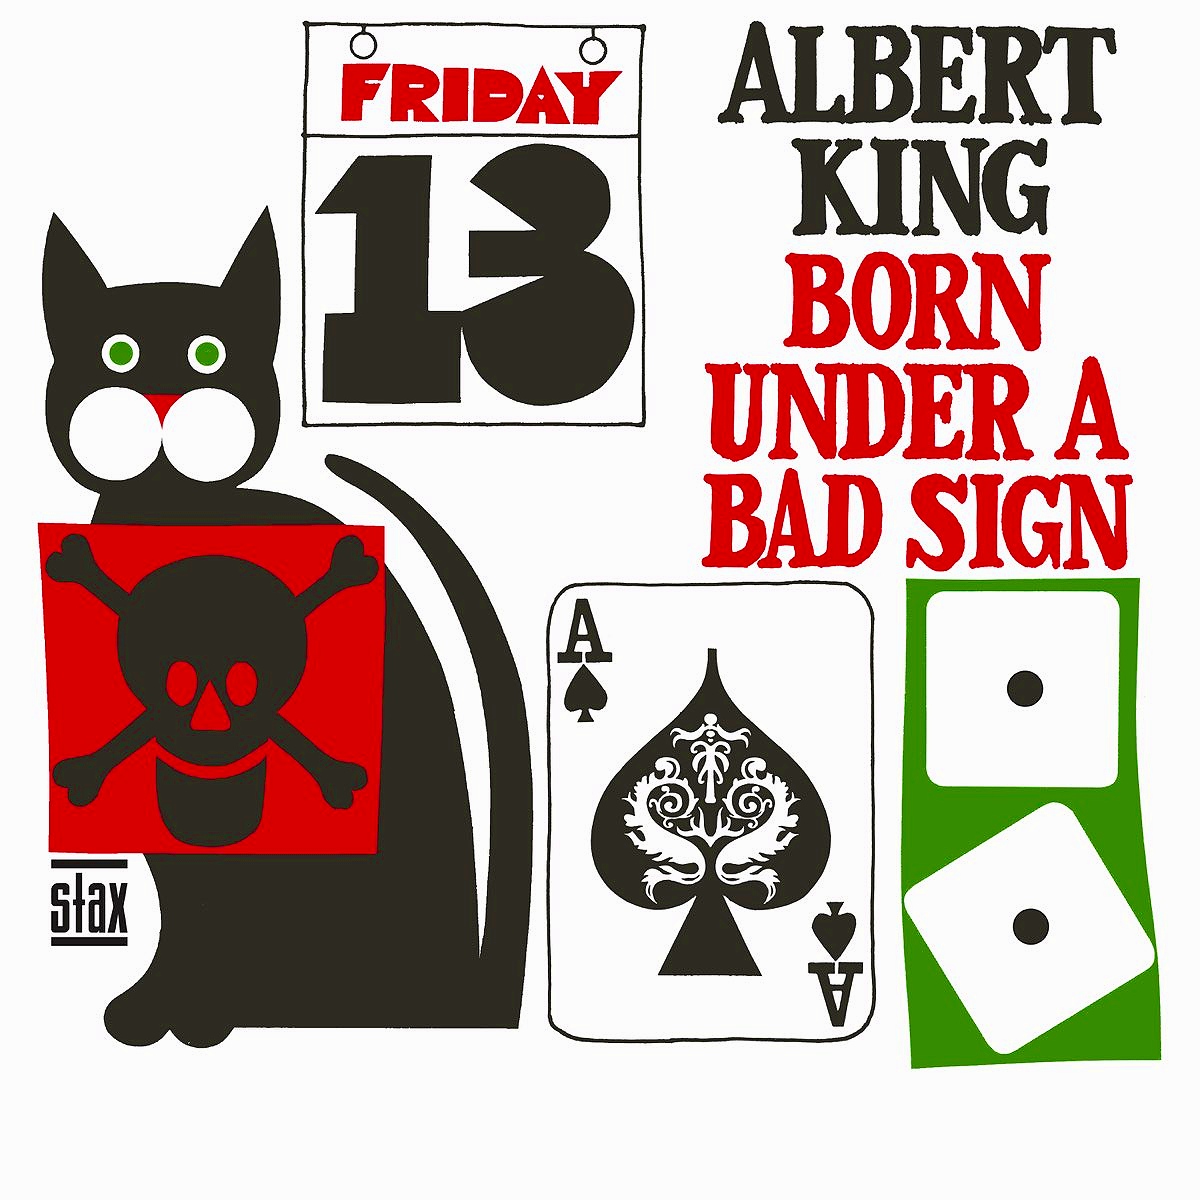 Cover of "Born Under a Bad Sign" by Albert King